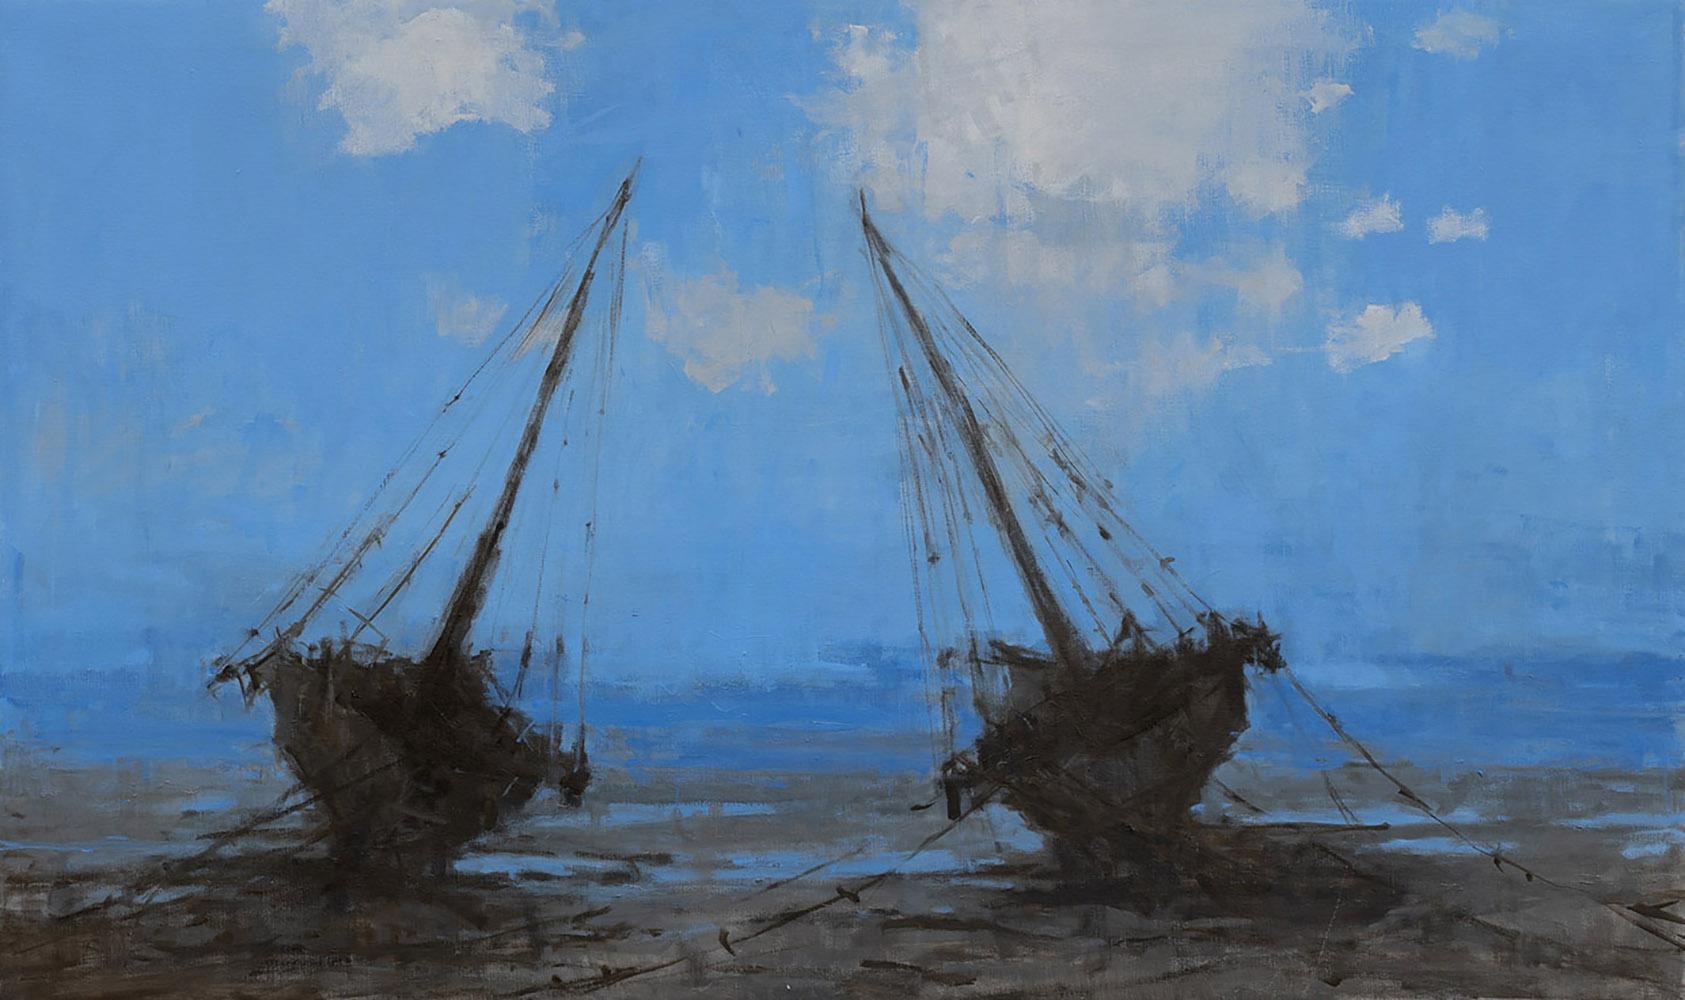 Barcas en Bagamoyo II is a unique oil on canvas painting by Spanish contemporary artist Calo Carratalá, dimensions are 94 × 158 cm (37 × 62.2 in). 
The artwork is signed and comes with a certificate of authenticity.

Contemporary painter Calo